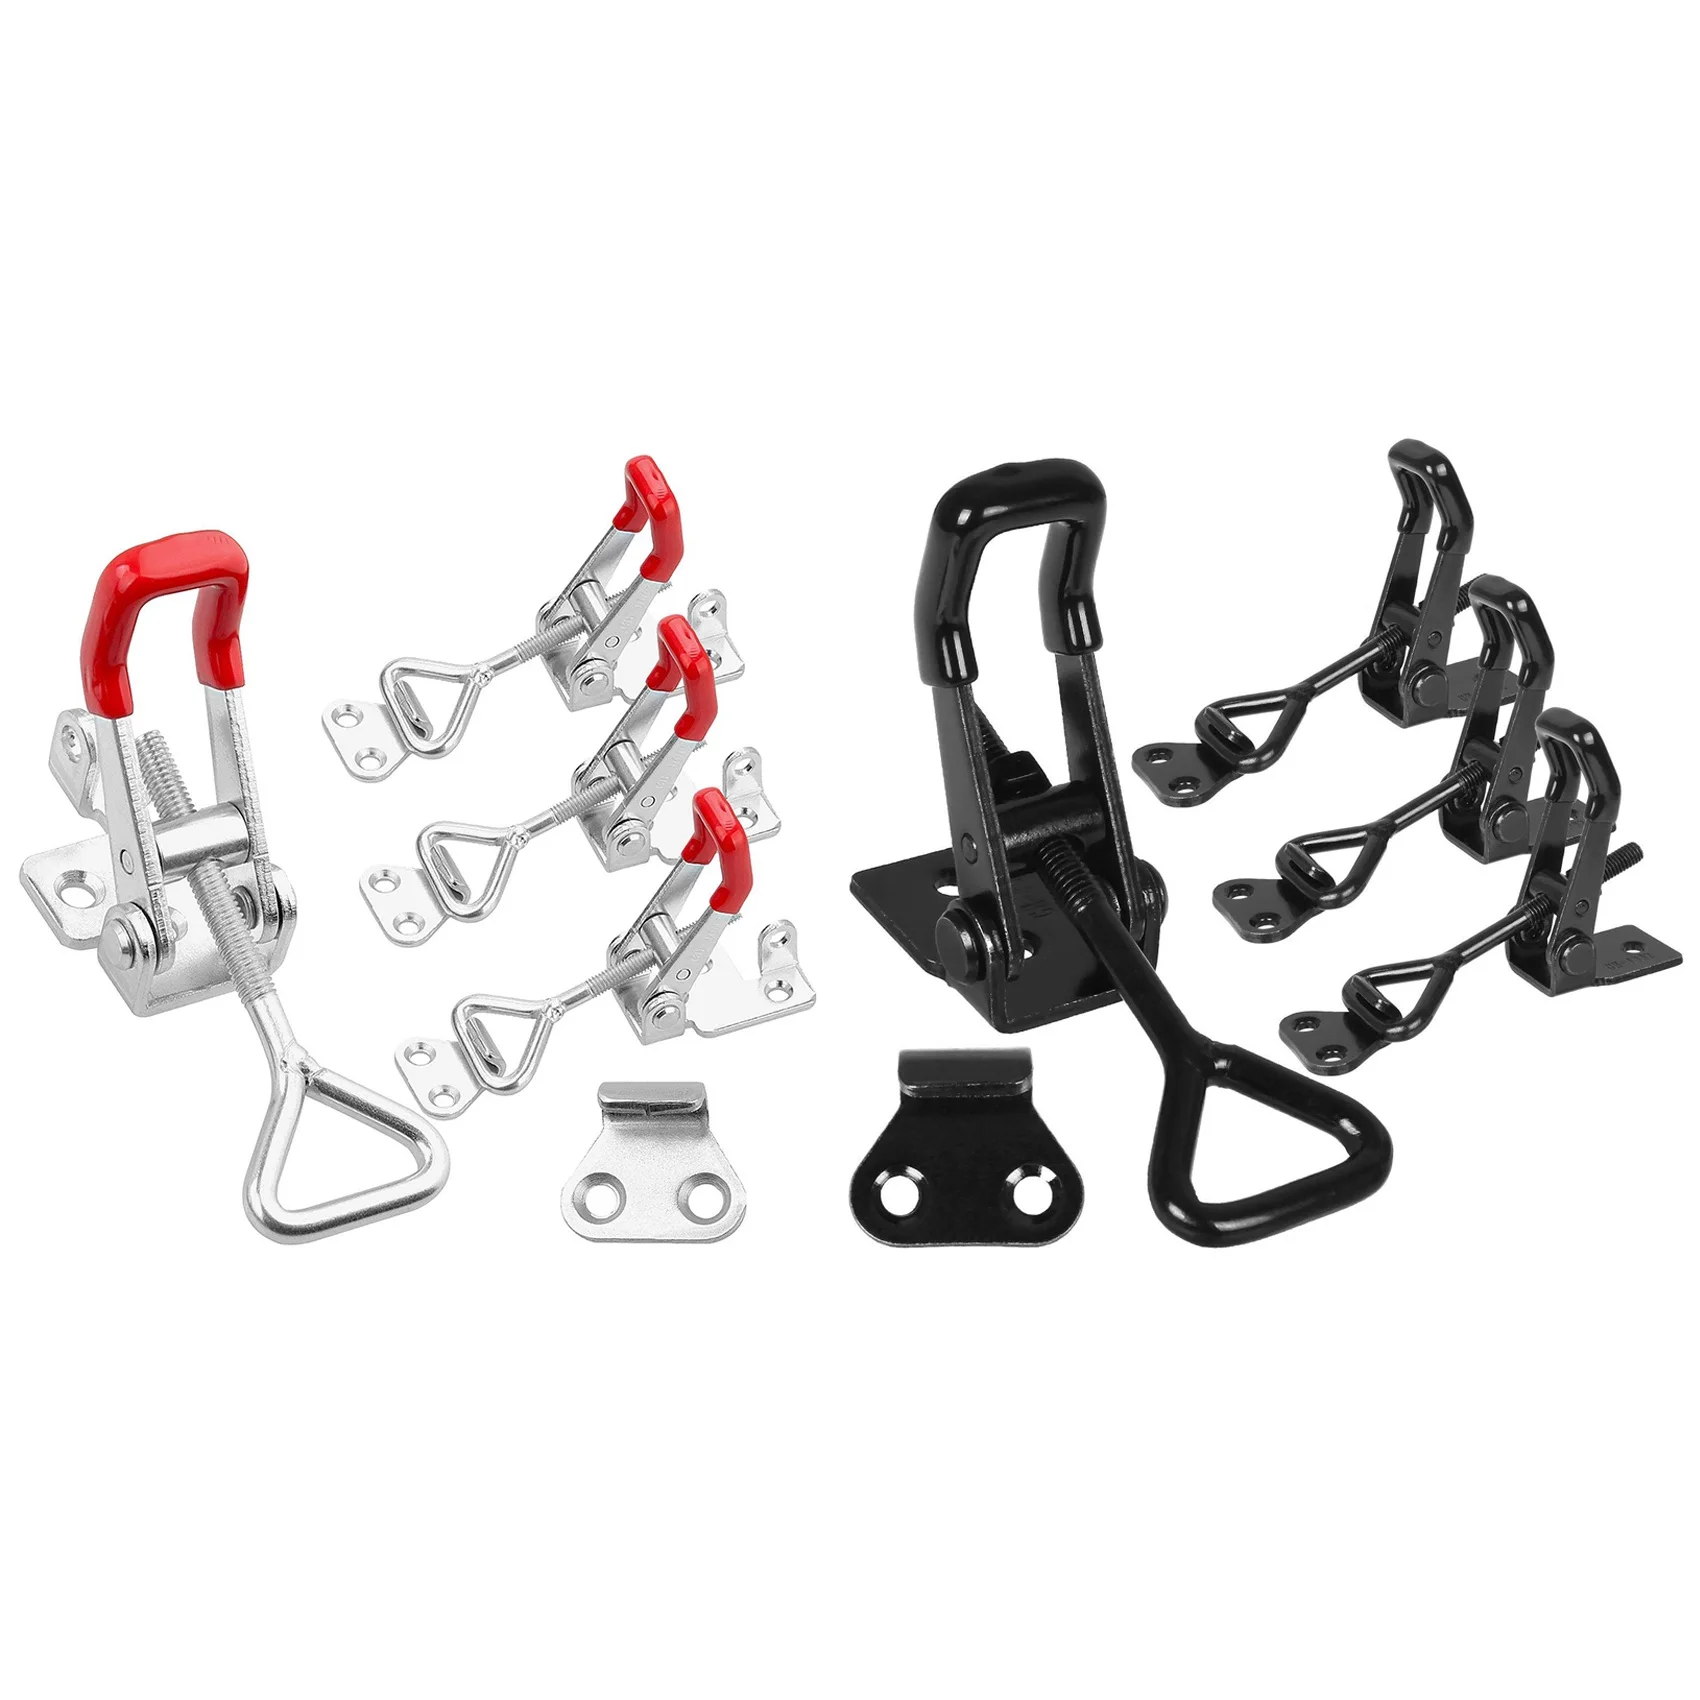 4Pack 550lbs Holding Capacity Heavy Duty 4002 Style Toggle Latch Hasp Clamp Adjustable Toggle Clamp